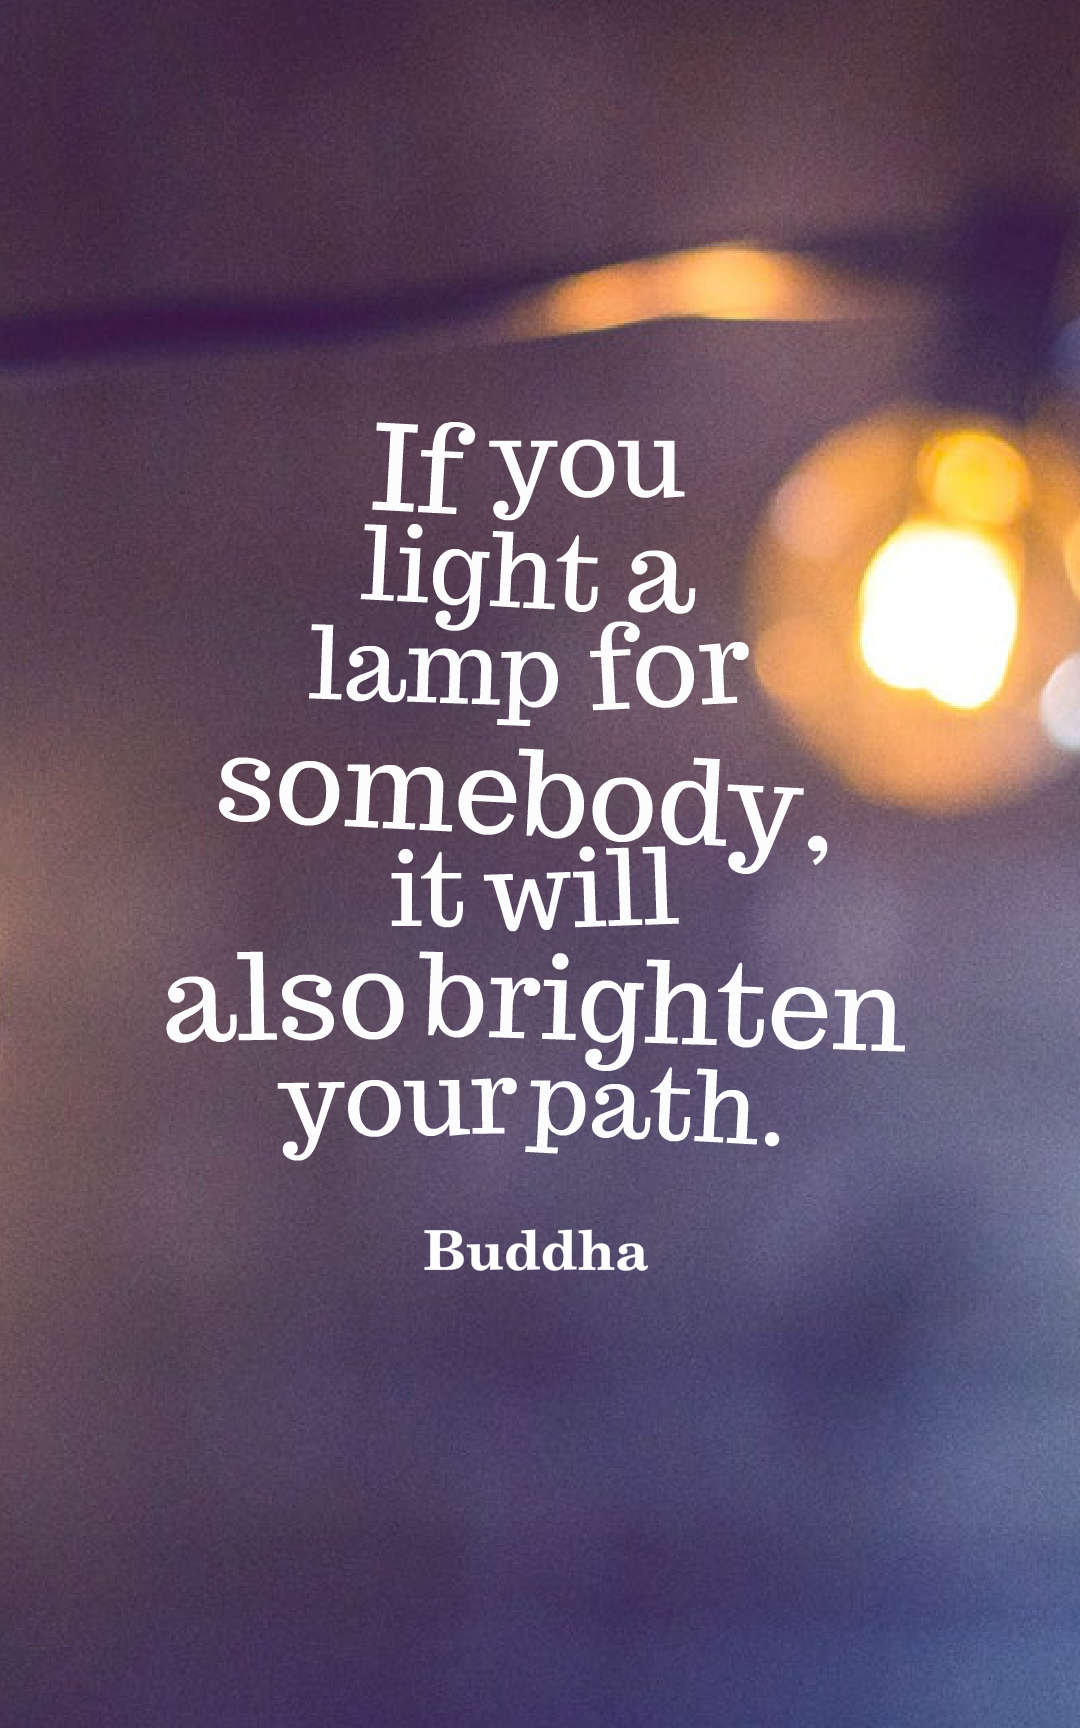 If you light a lamp for somebody, it will also brighten your path.